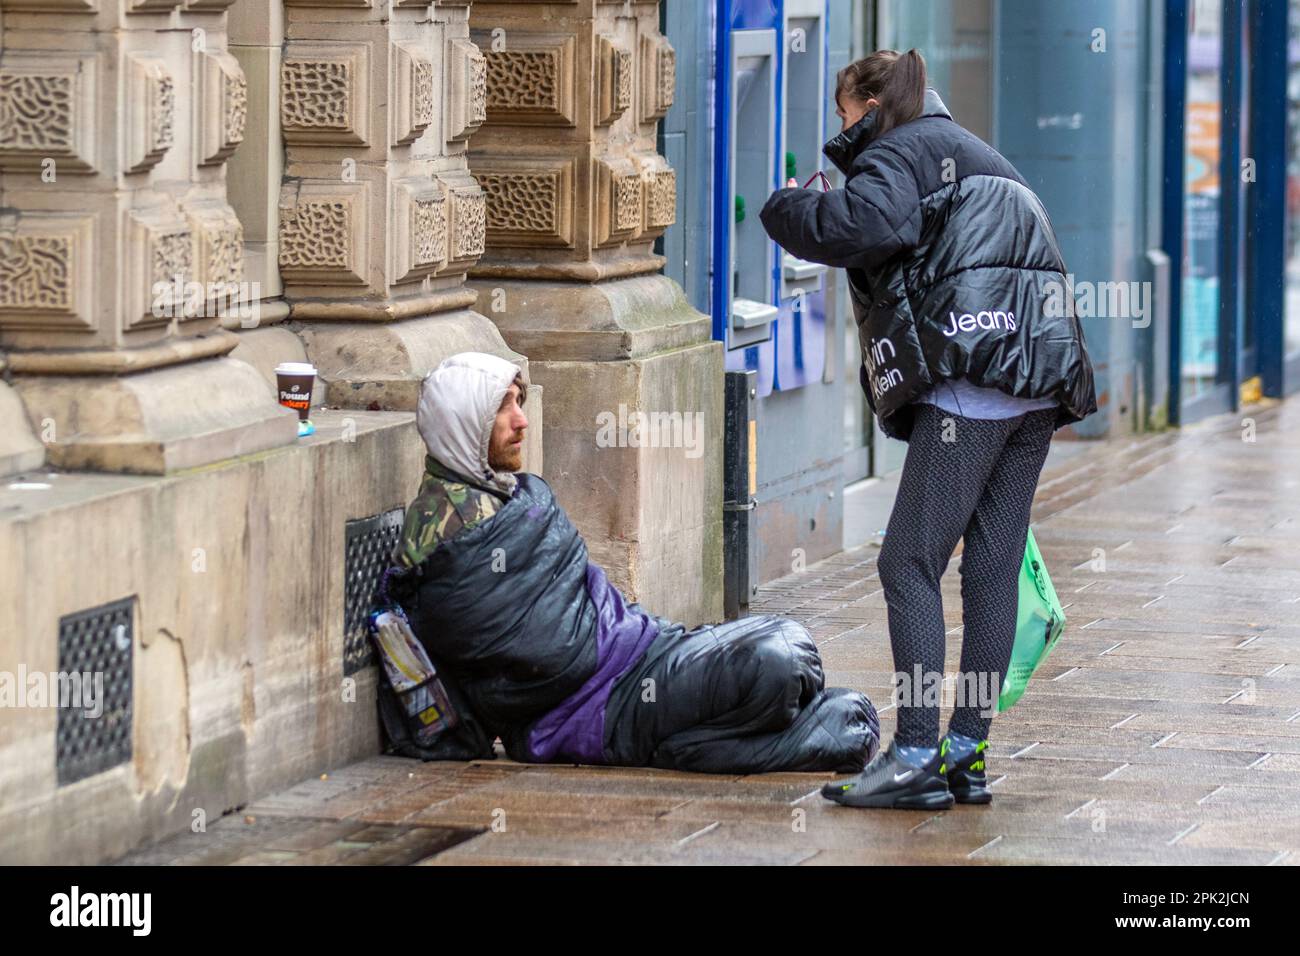 PRESTON, Lancashire.  Uk Weather. Homeless people,  Shops, shoppers on a rainy day in the city centre.  Outbreaks of rain pushing eastwards but gradually clearing from the northwest. Credit MediaWorldImages/AlamyLiveNews Stock Photo